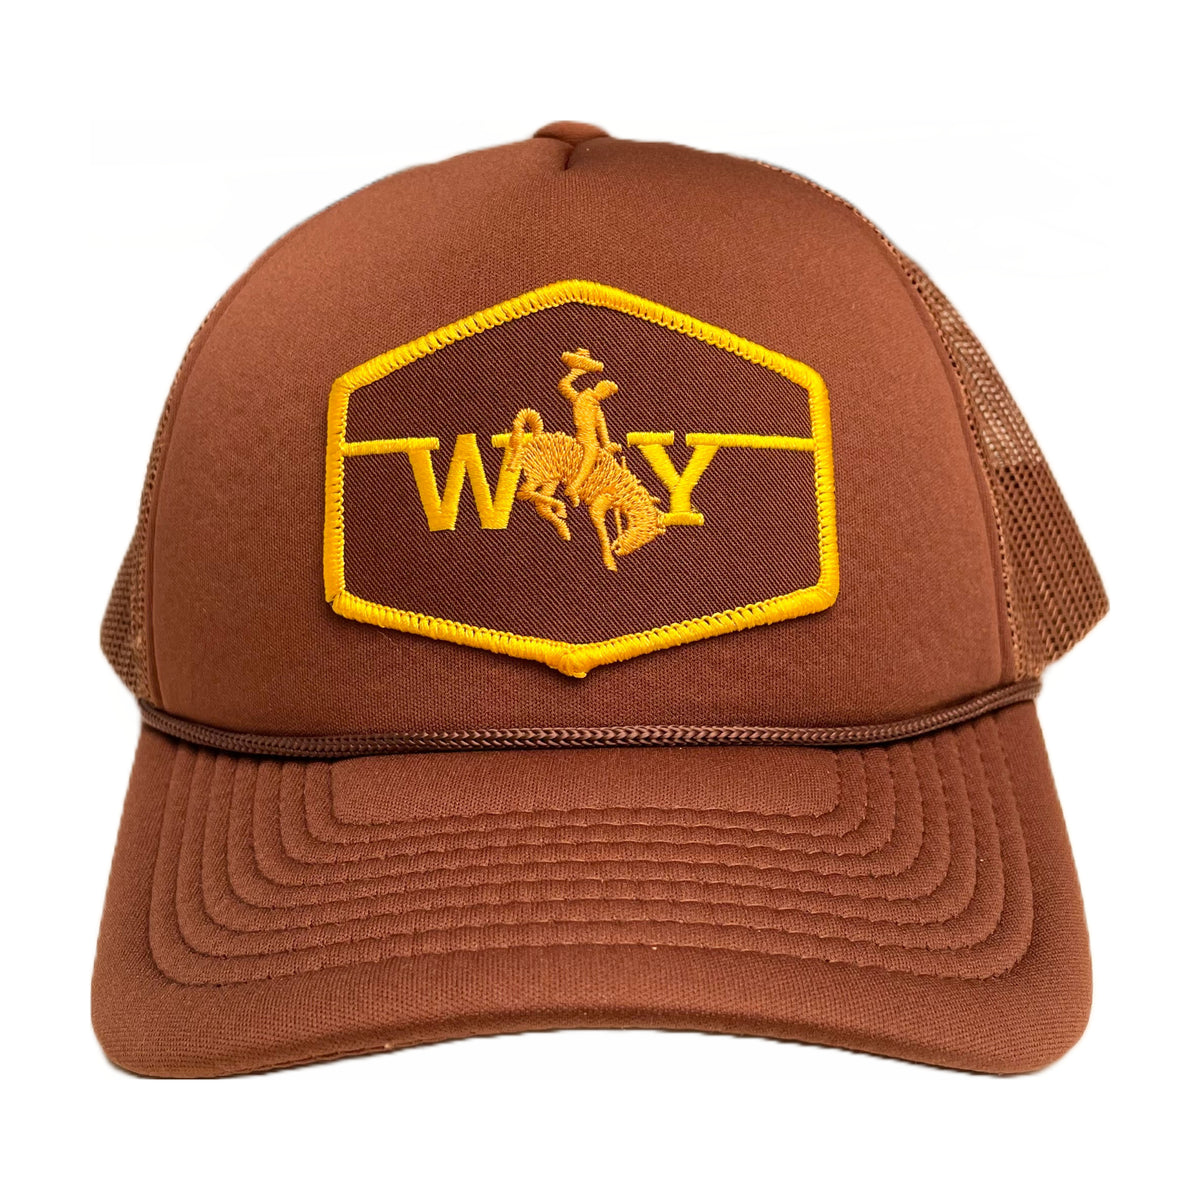 Brown Trucker Hat with Brown Mesh Back - Wyoming Bronco Patch